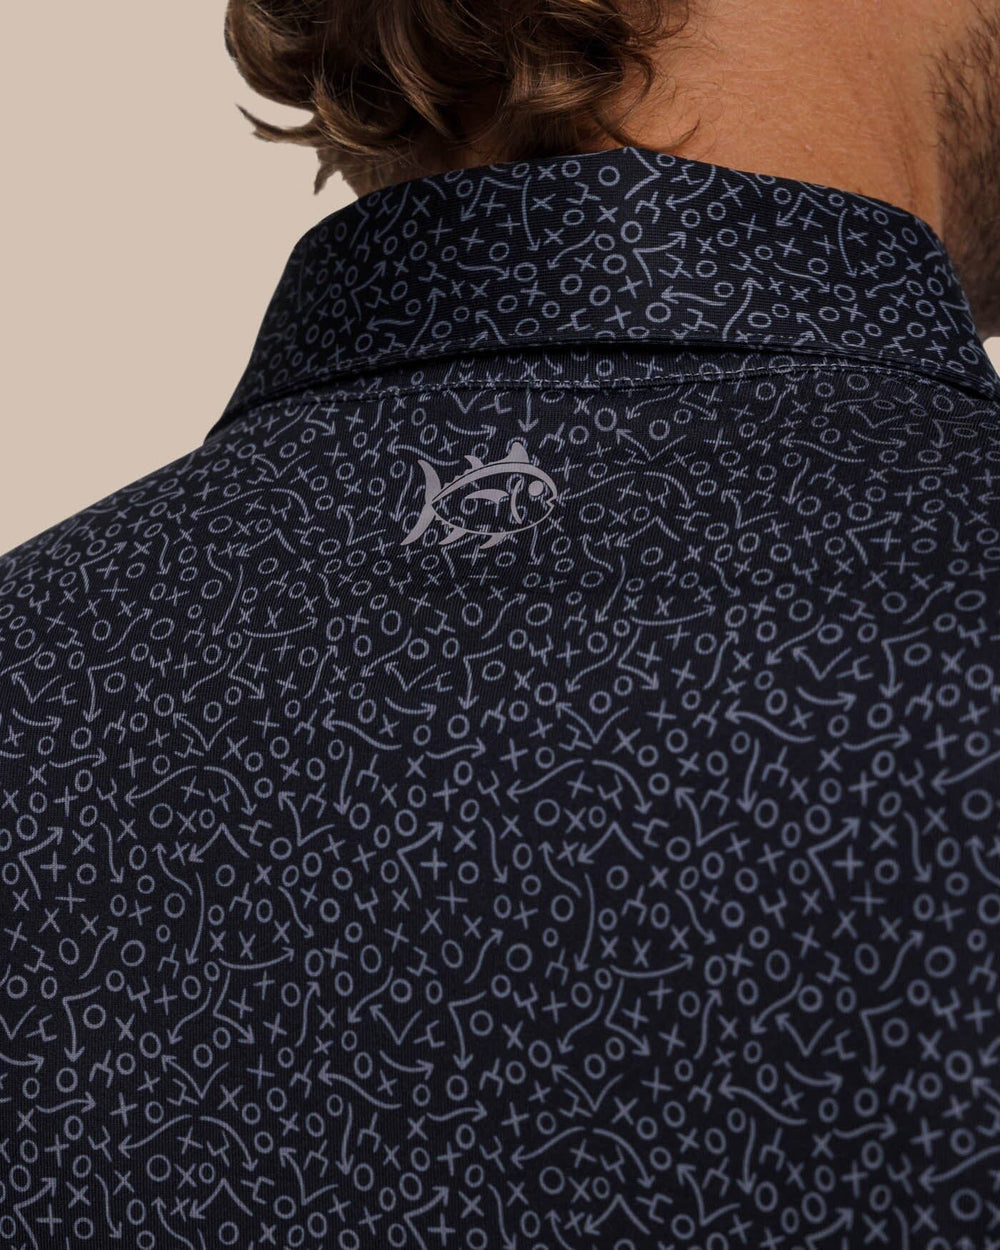 The yoke view of the Southern Tide Driver Gameplay Polo by Southern Tide - Black